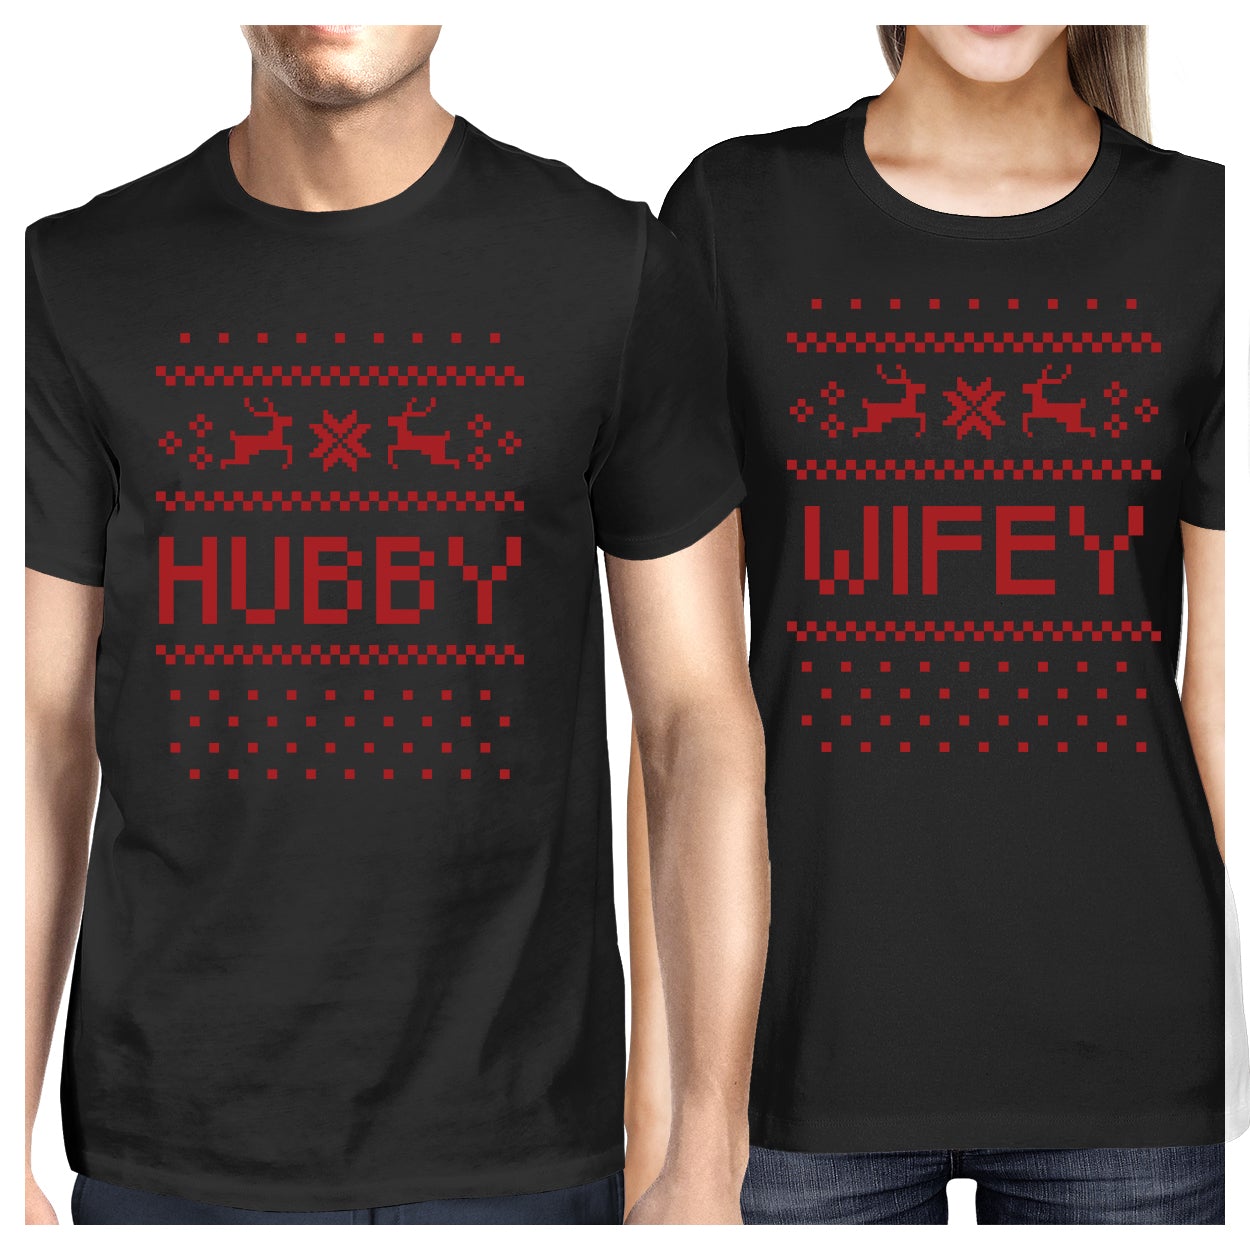 Pixel Nordic Hubby And Wifey Matching Couple Black Shirts